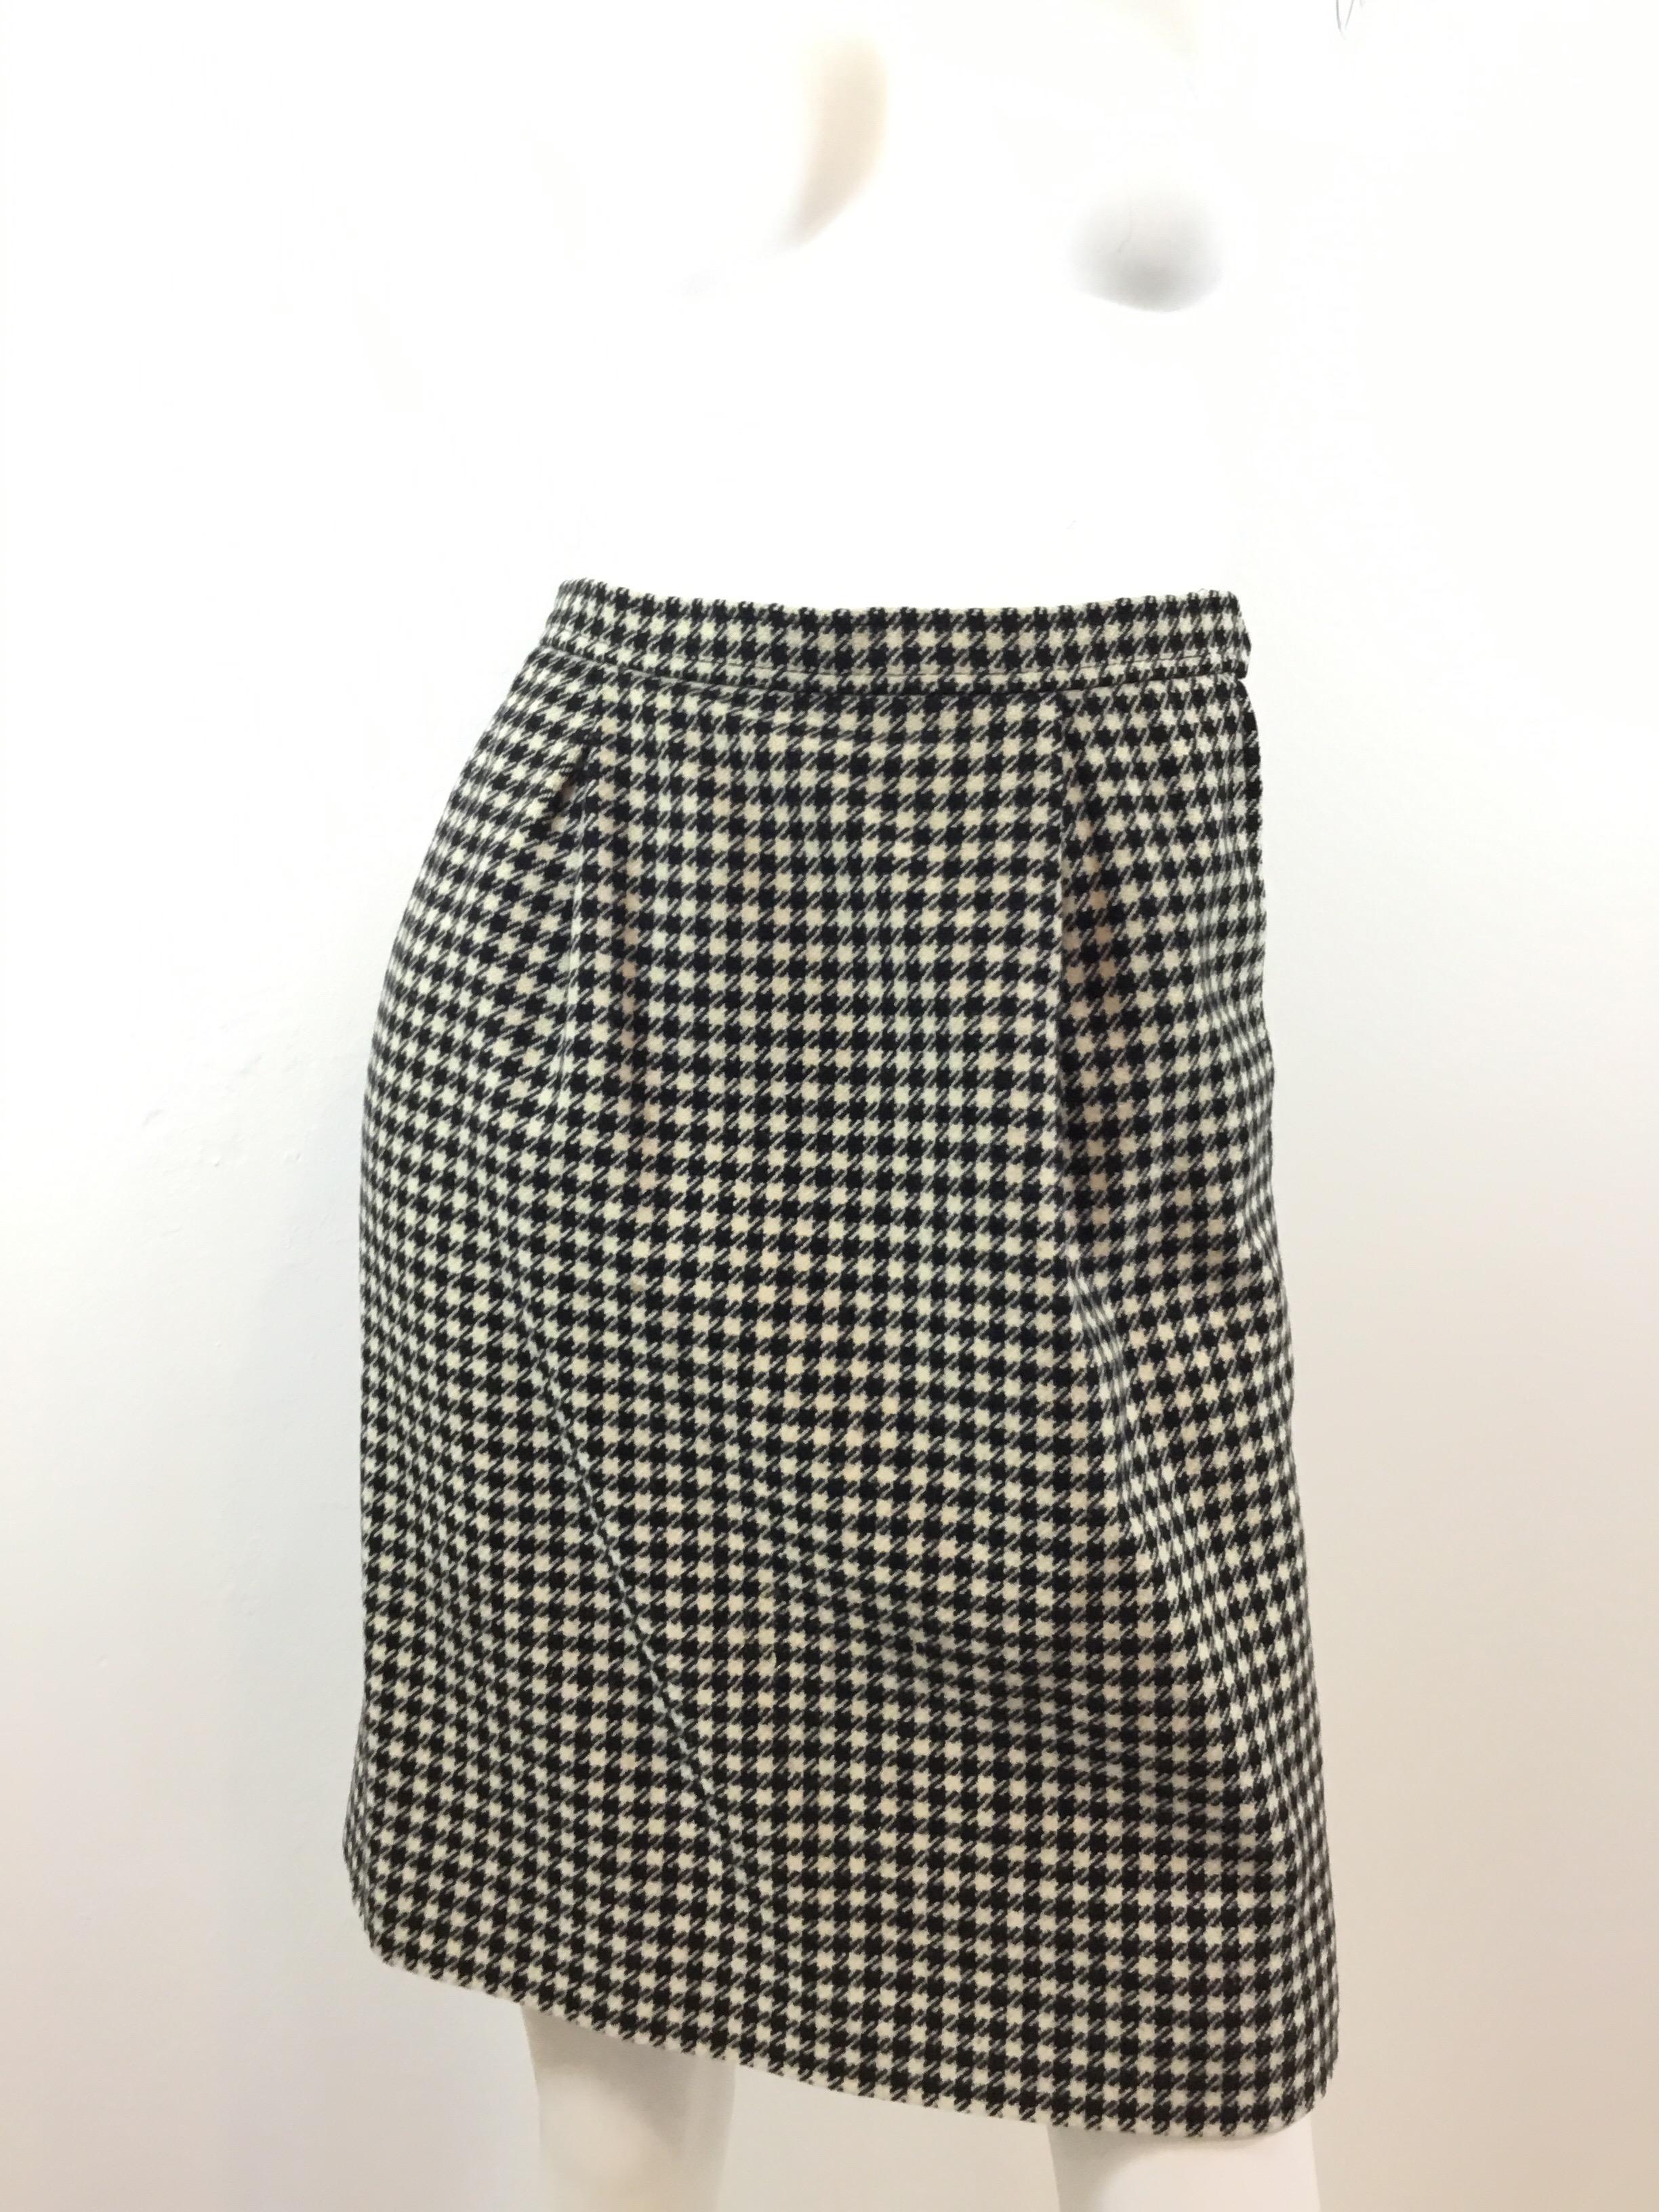 Yves Saint Laurent Rive Gauche Houndstooth Skirt Suit c. 1970's In Excellent Condition In Carmel, CA